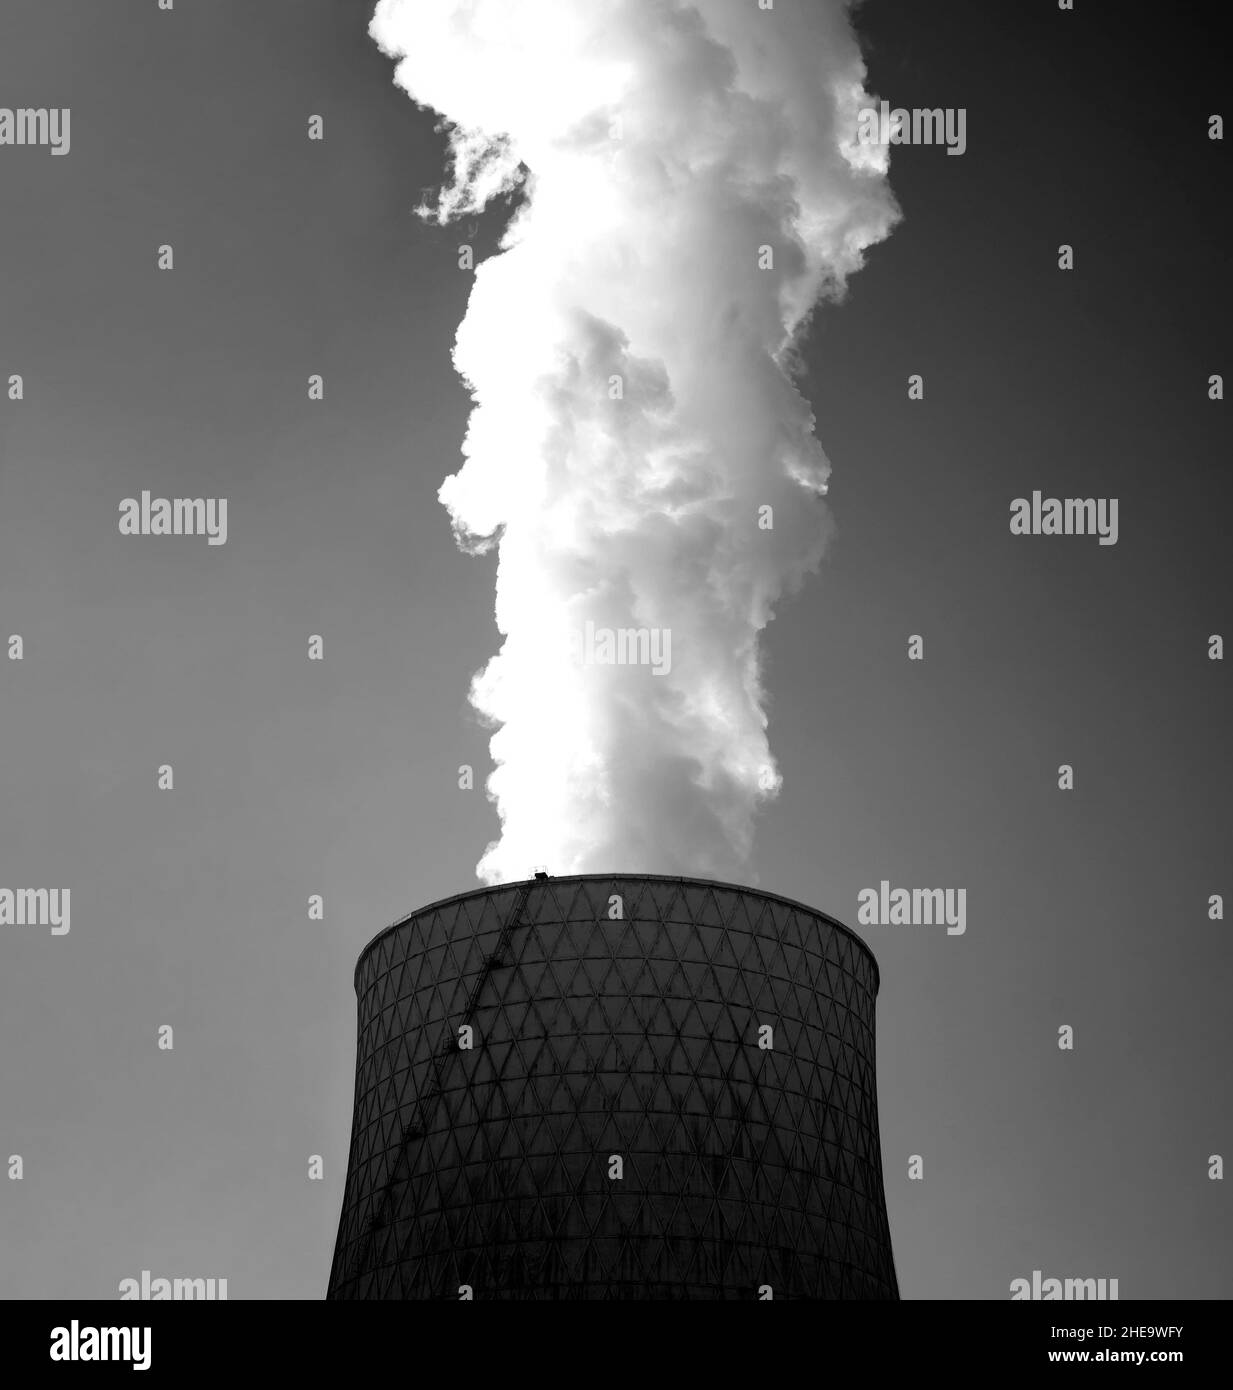 Big and toxic smoke that comes from an industrial chimney. Stock Photo